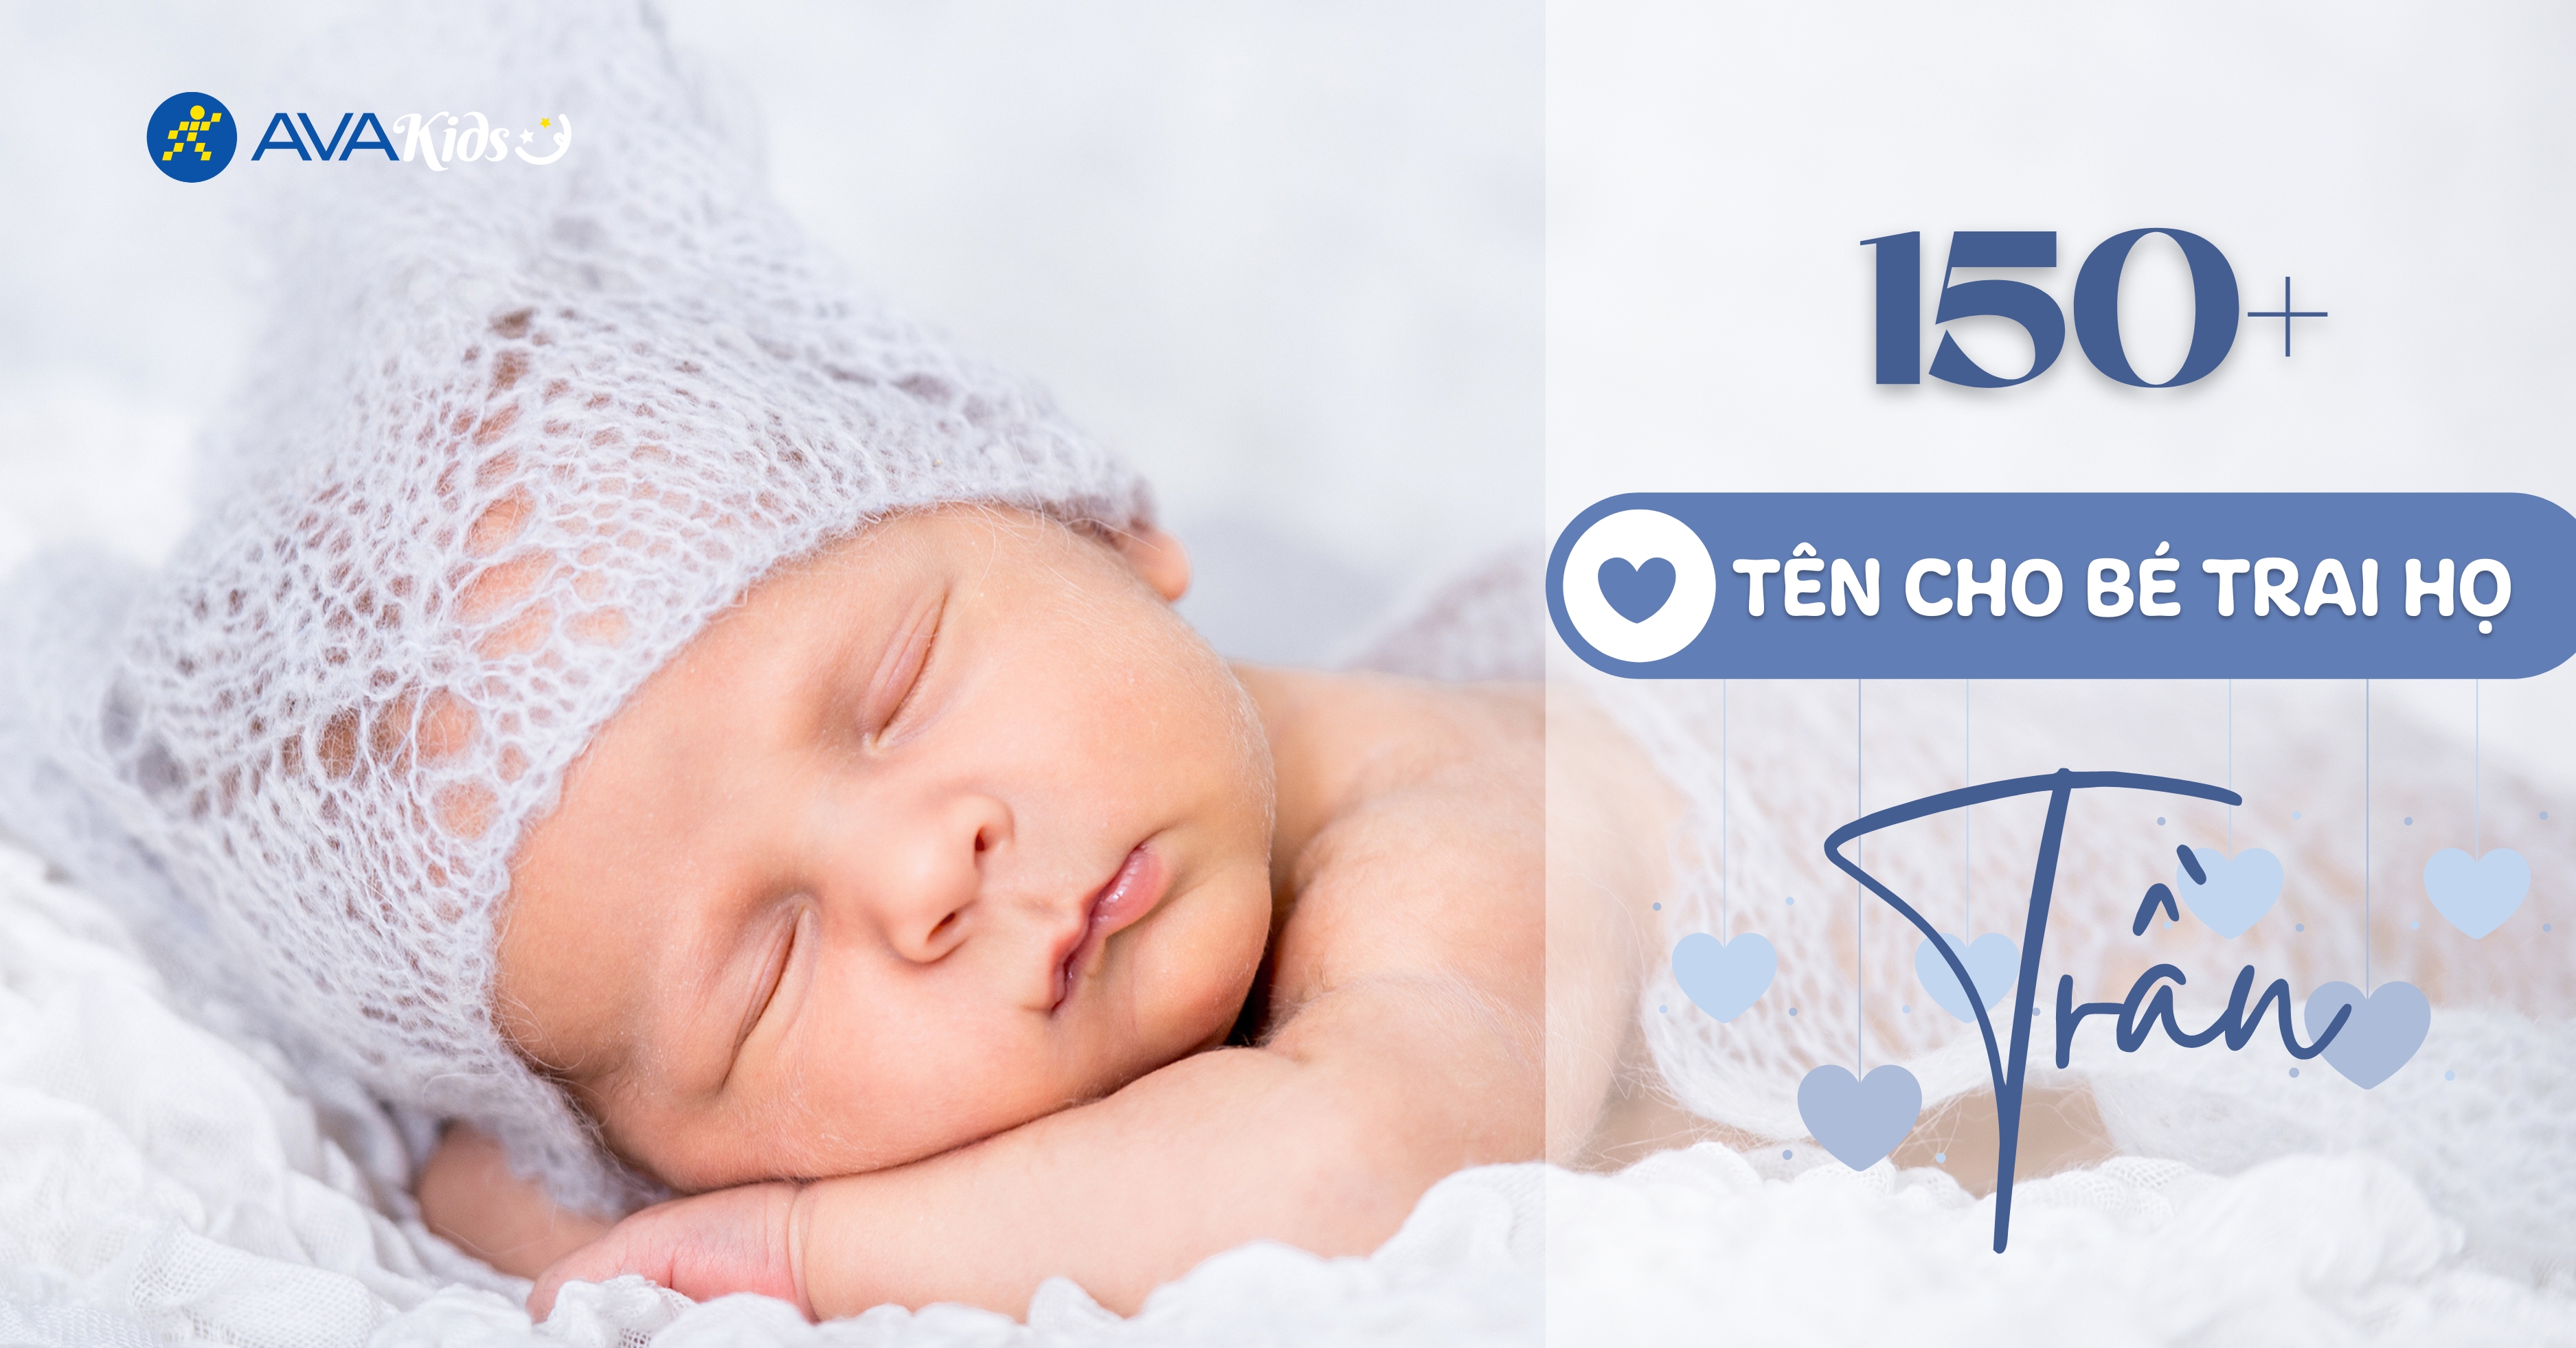 Which names are considered beautiful for baby boys with the last name Trần?